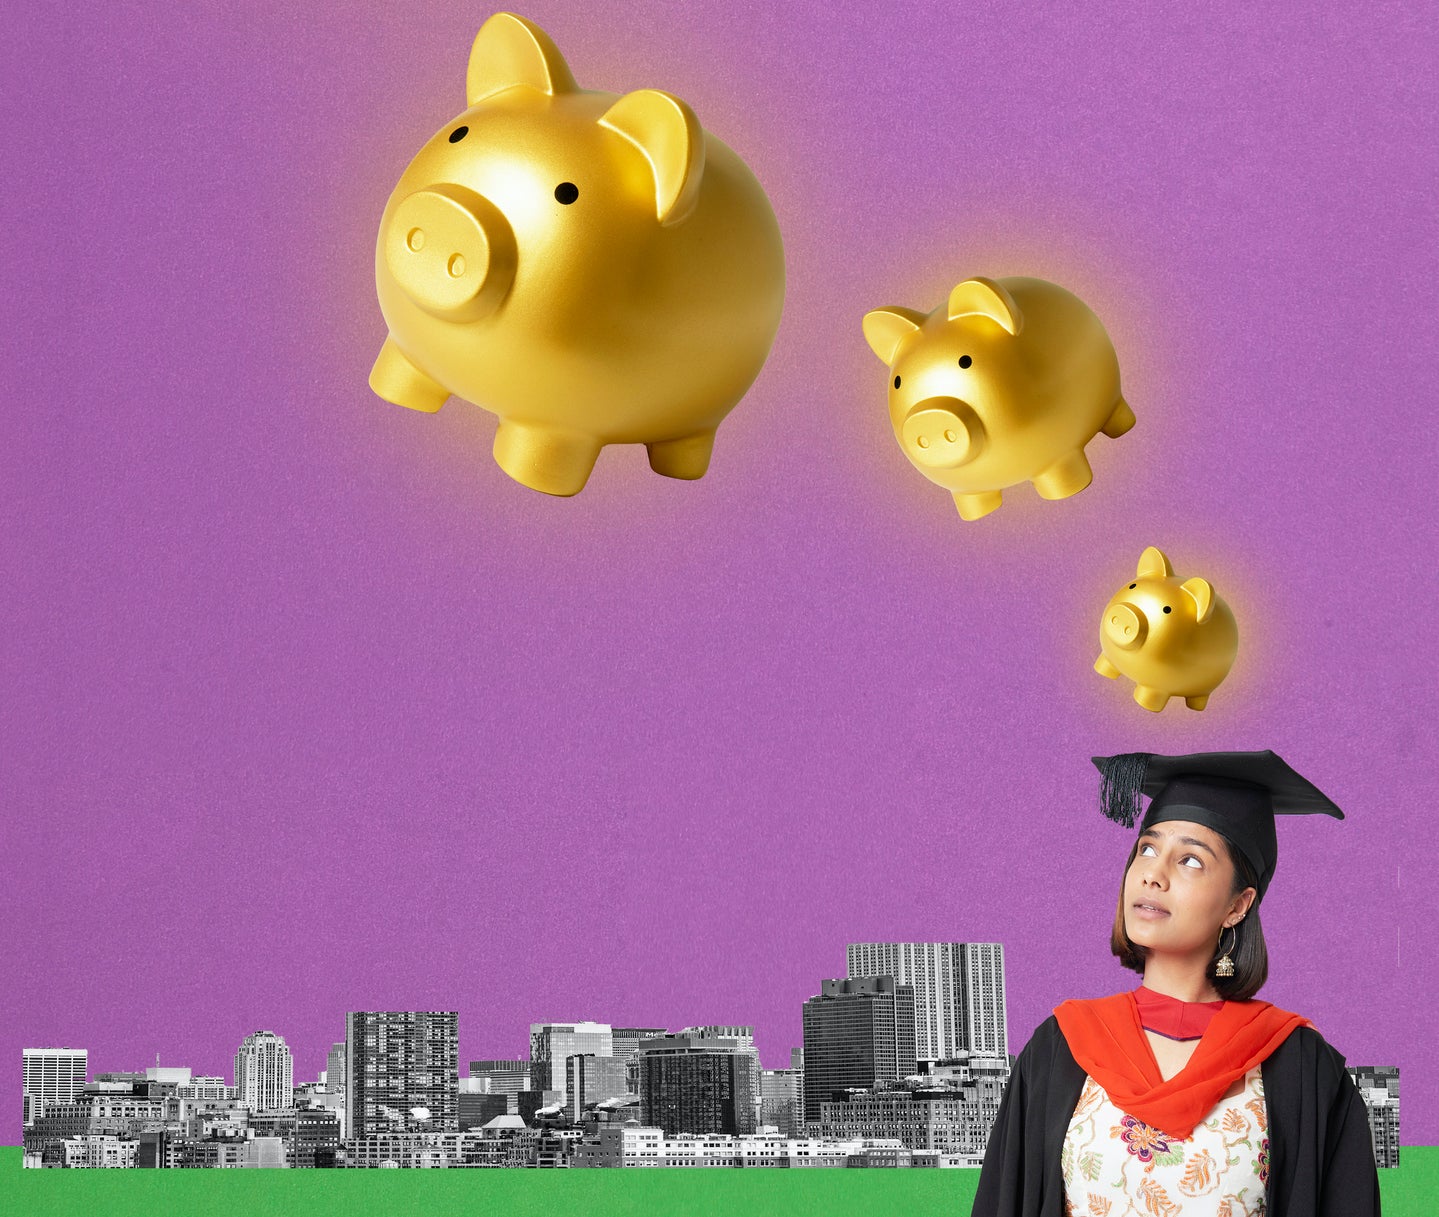 Here Are The Programs You Need To Know About Before The Student Loan Pause Ends